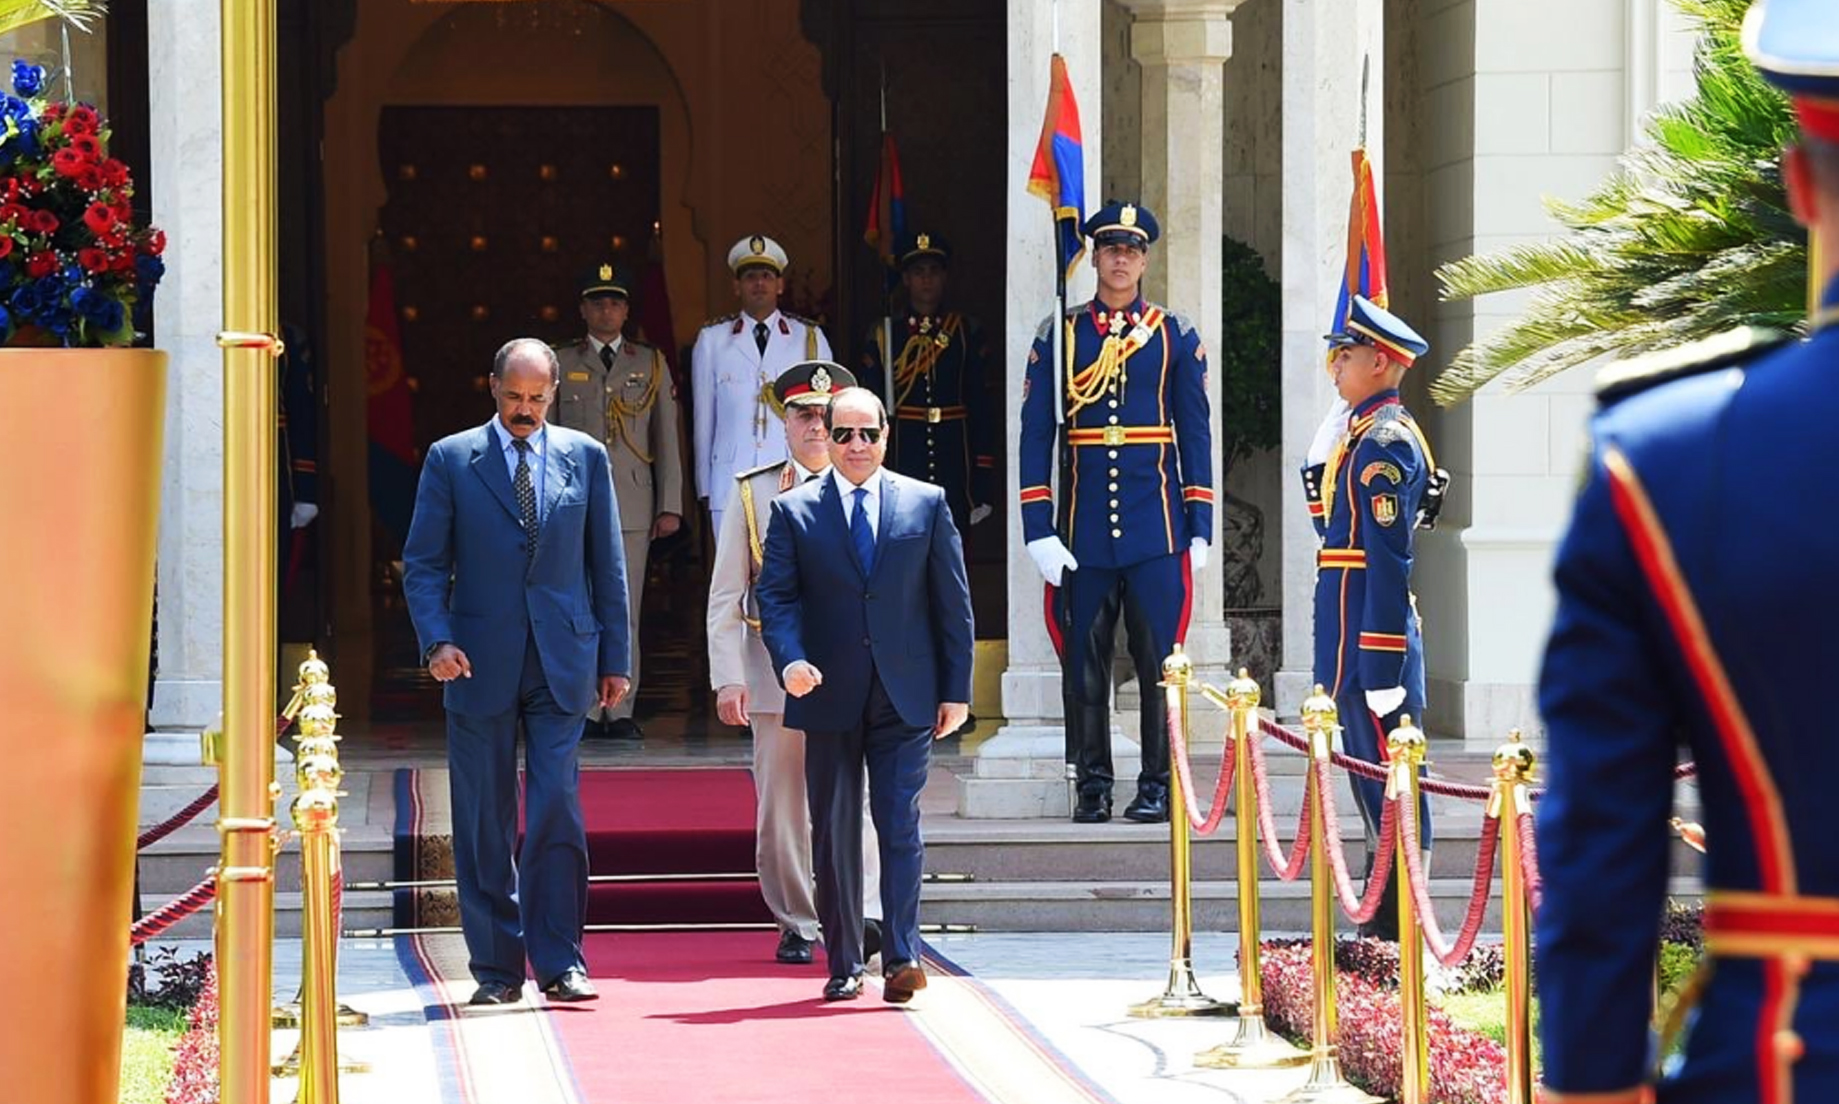 Eritrea president in Egypt for official visit, Sudan likely to feature